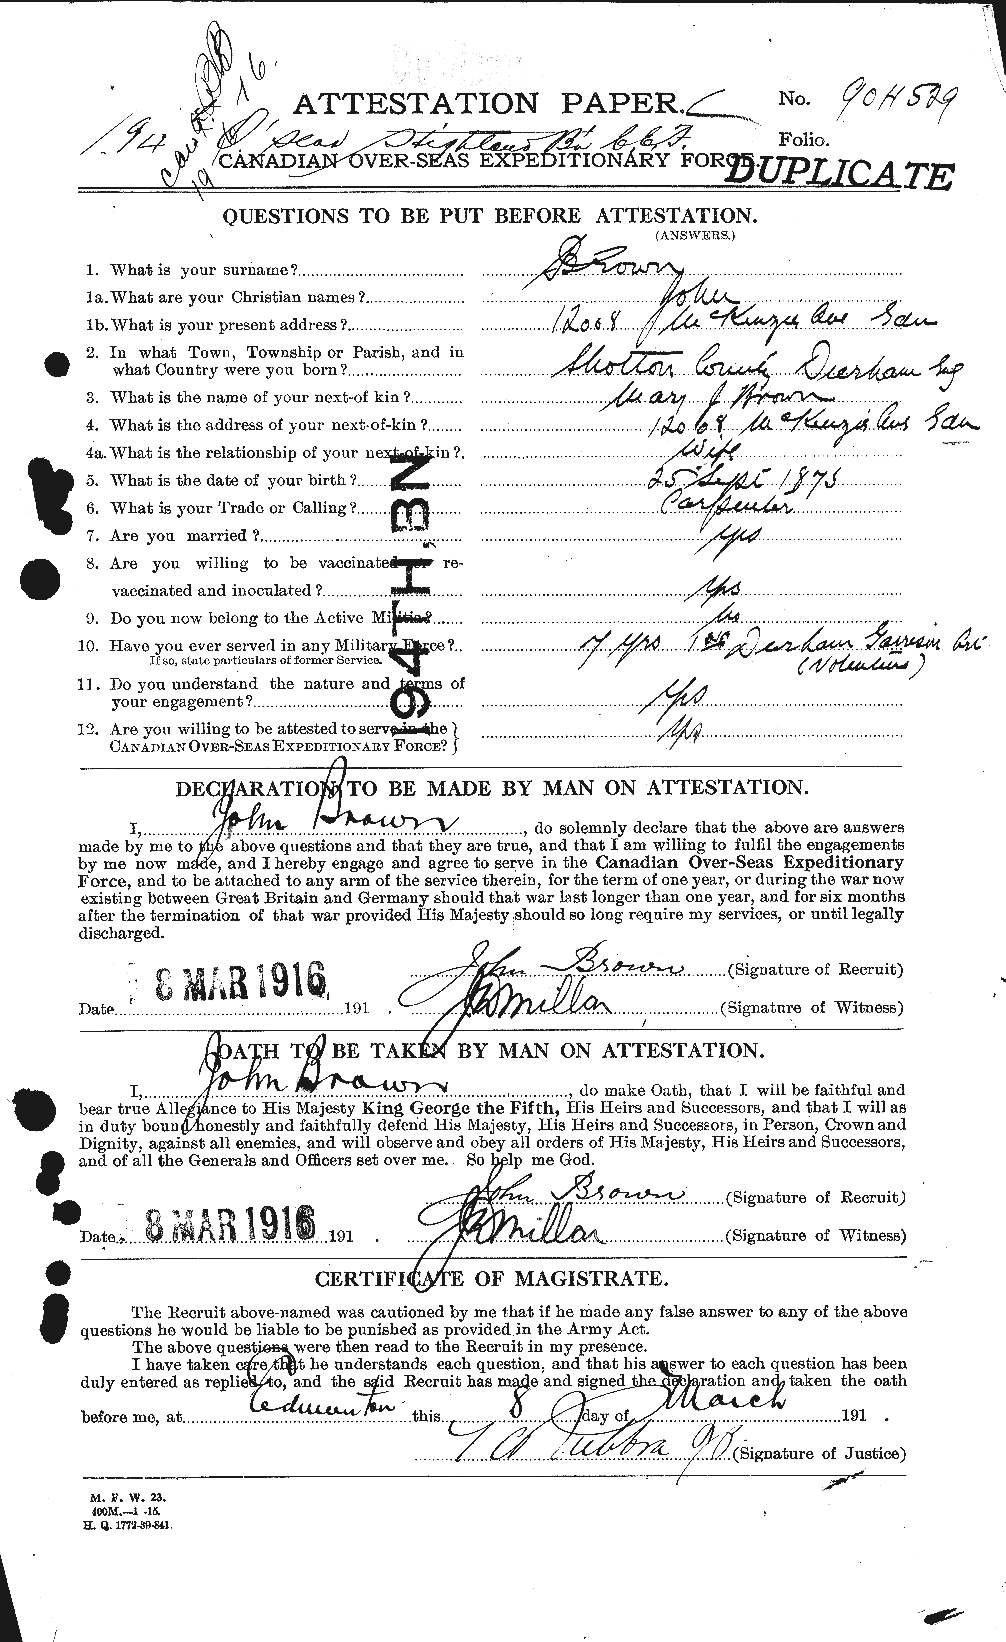 Personnel Records of the First World War - CEF 263898a